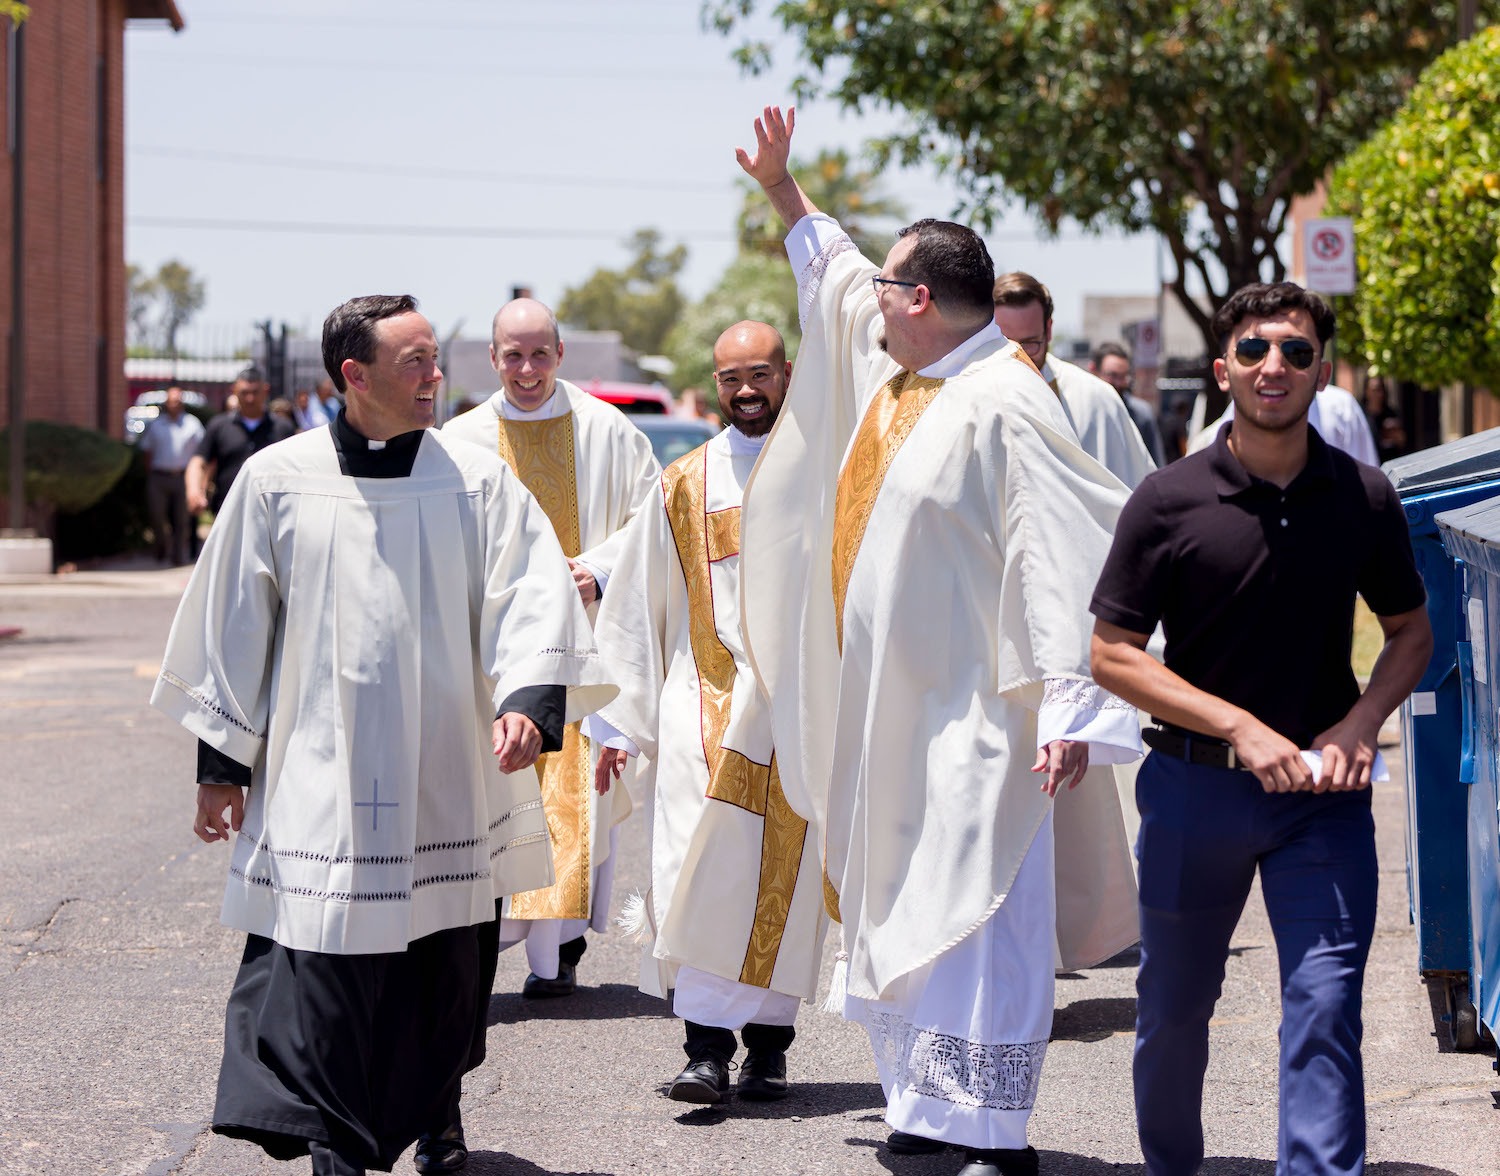 diocese of phoenix priest assignments 2021